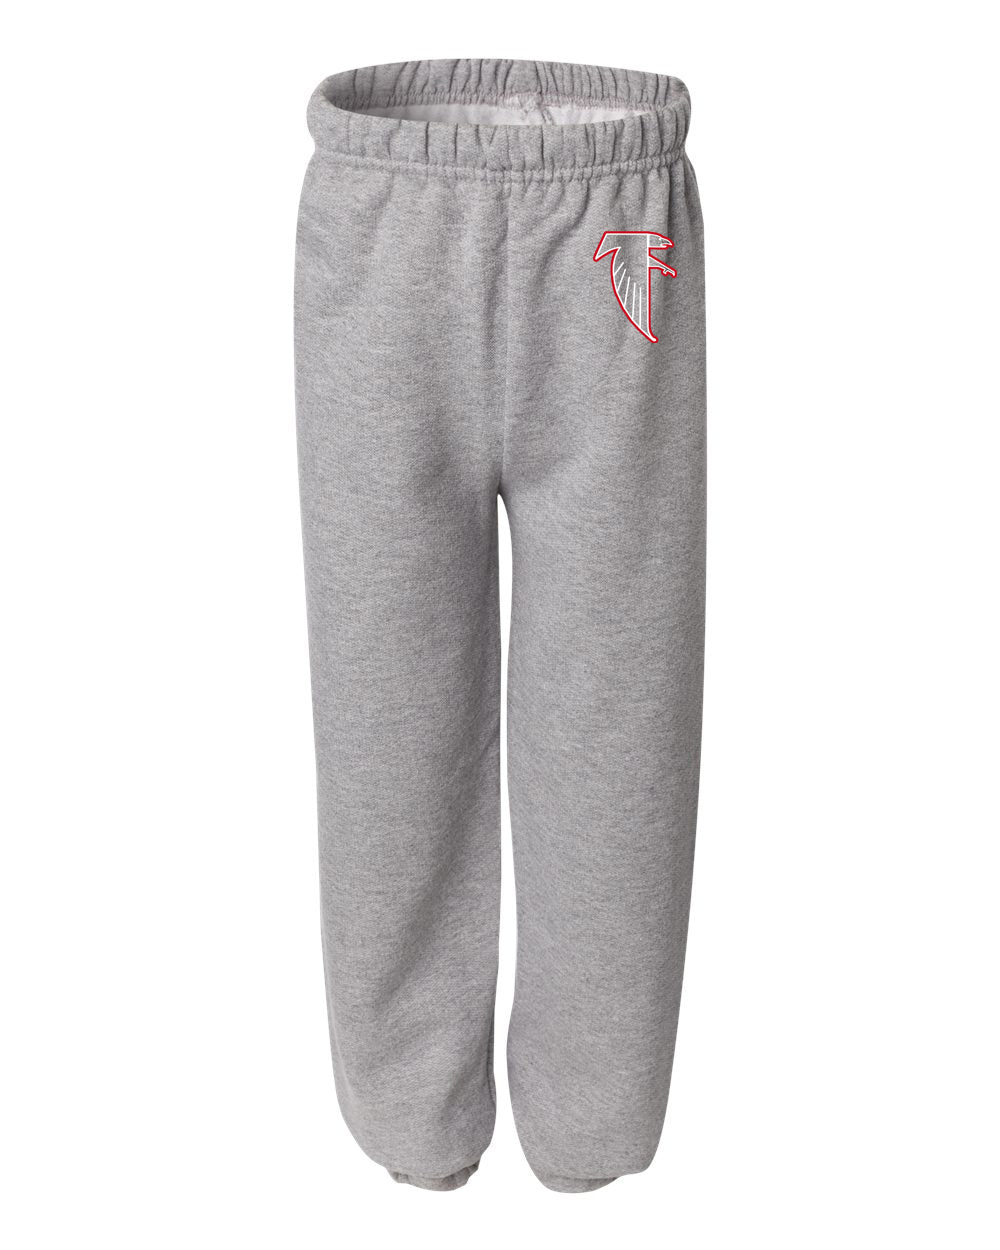 Youth - Firelands - Jogger Sweatpants - Mistakes on the Lake